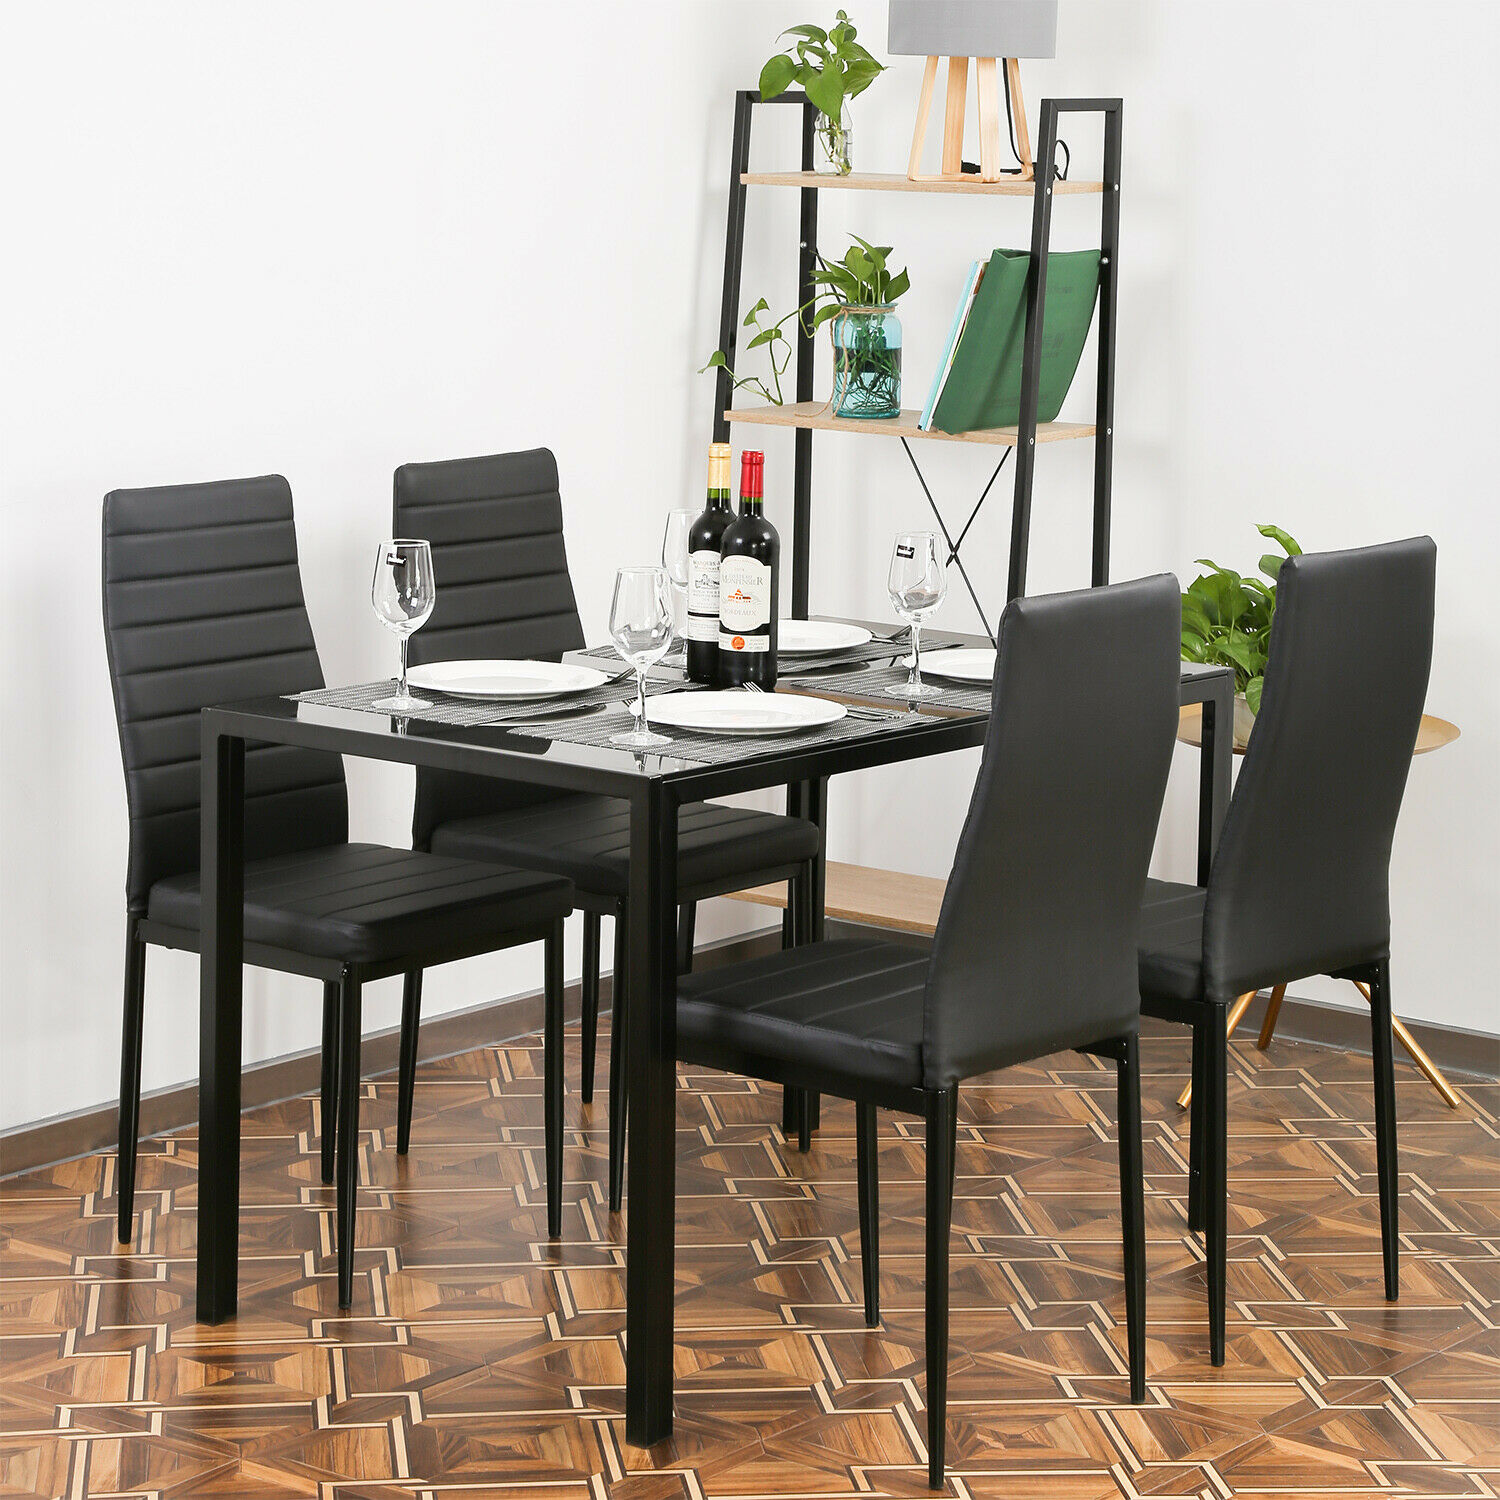 Dining Table Set Dining Room Table Set Dinner Table Dinette Sets For Small Spaces Dinning Table With Chairs Set Of 4 Kitchen Dining Table Set For